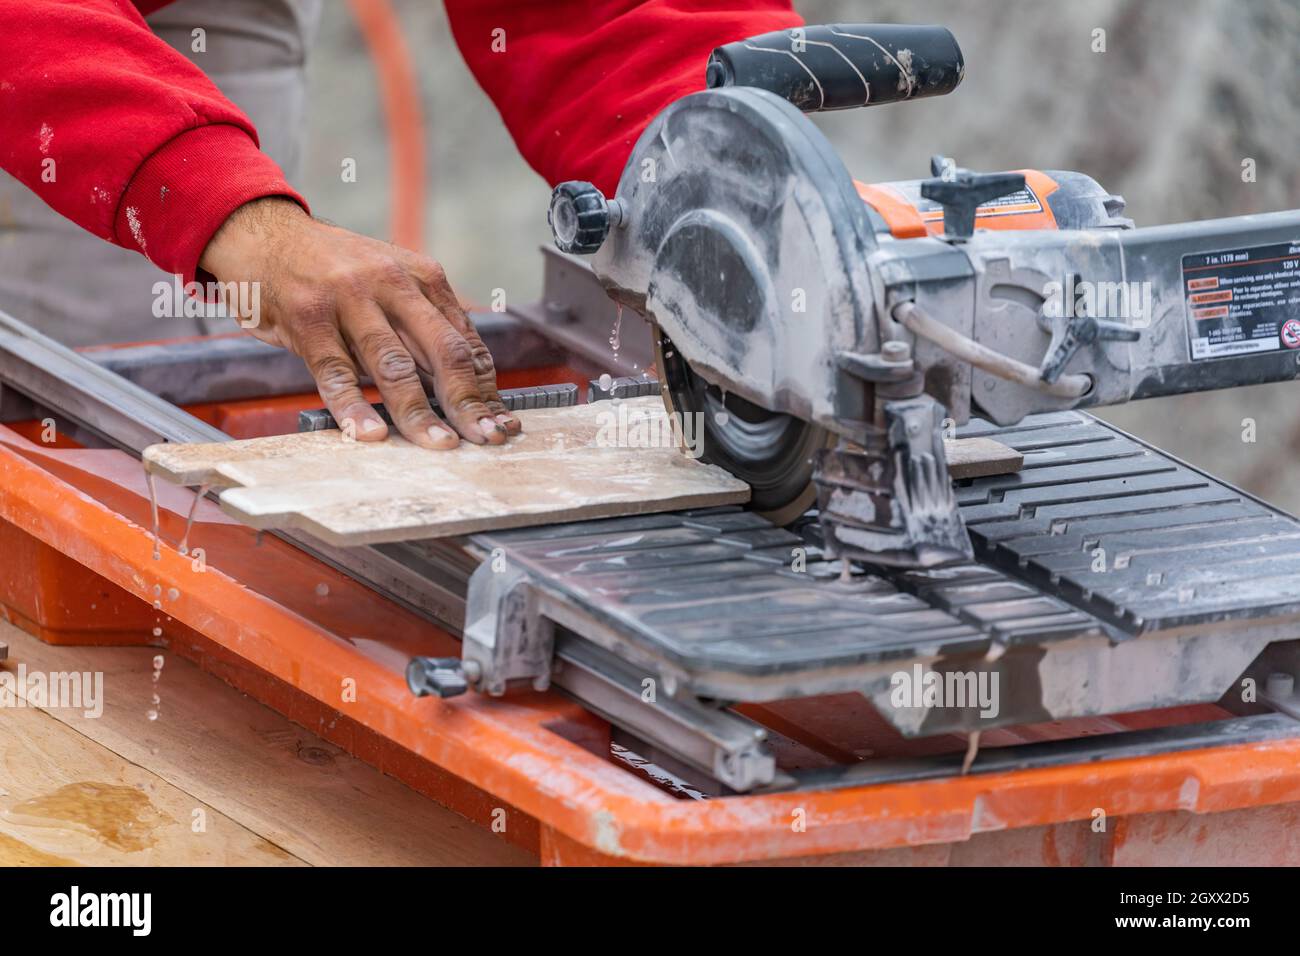 Worker Using Wet Tile Saw to Cut Wall Tile At Construction Site. Stock Photo